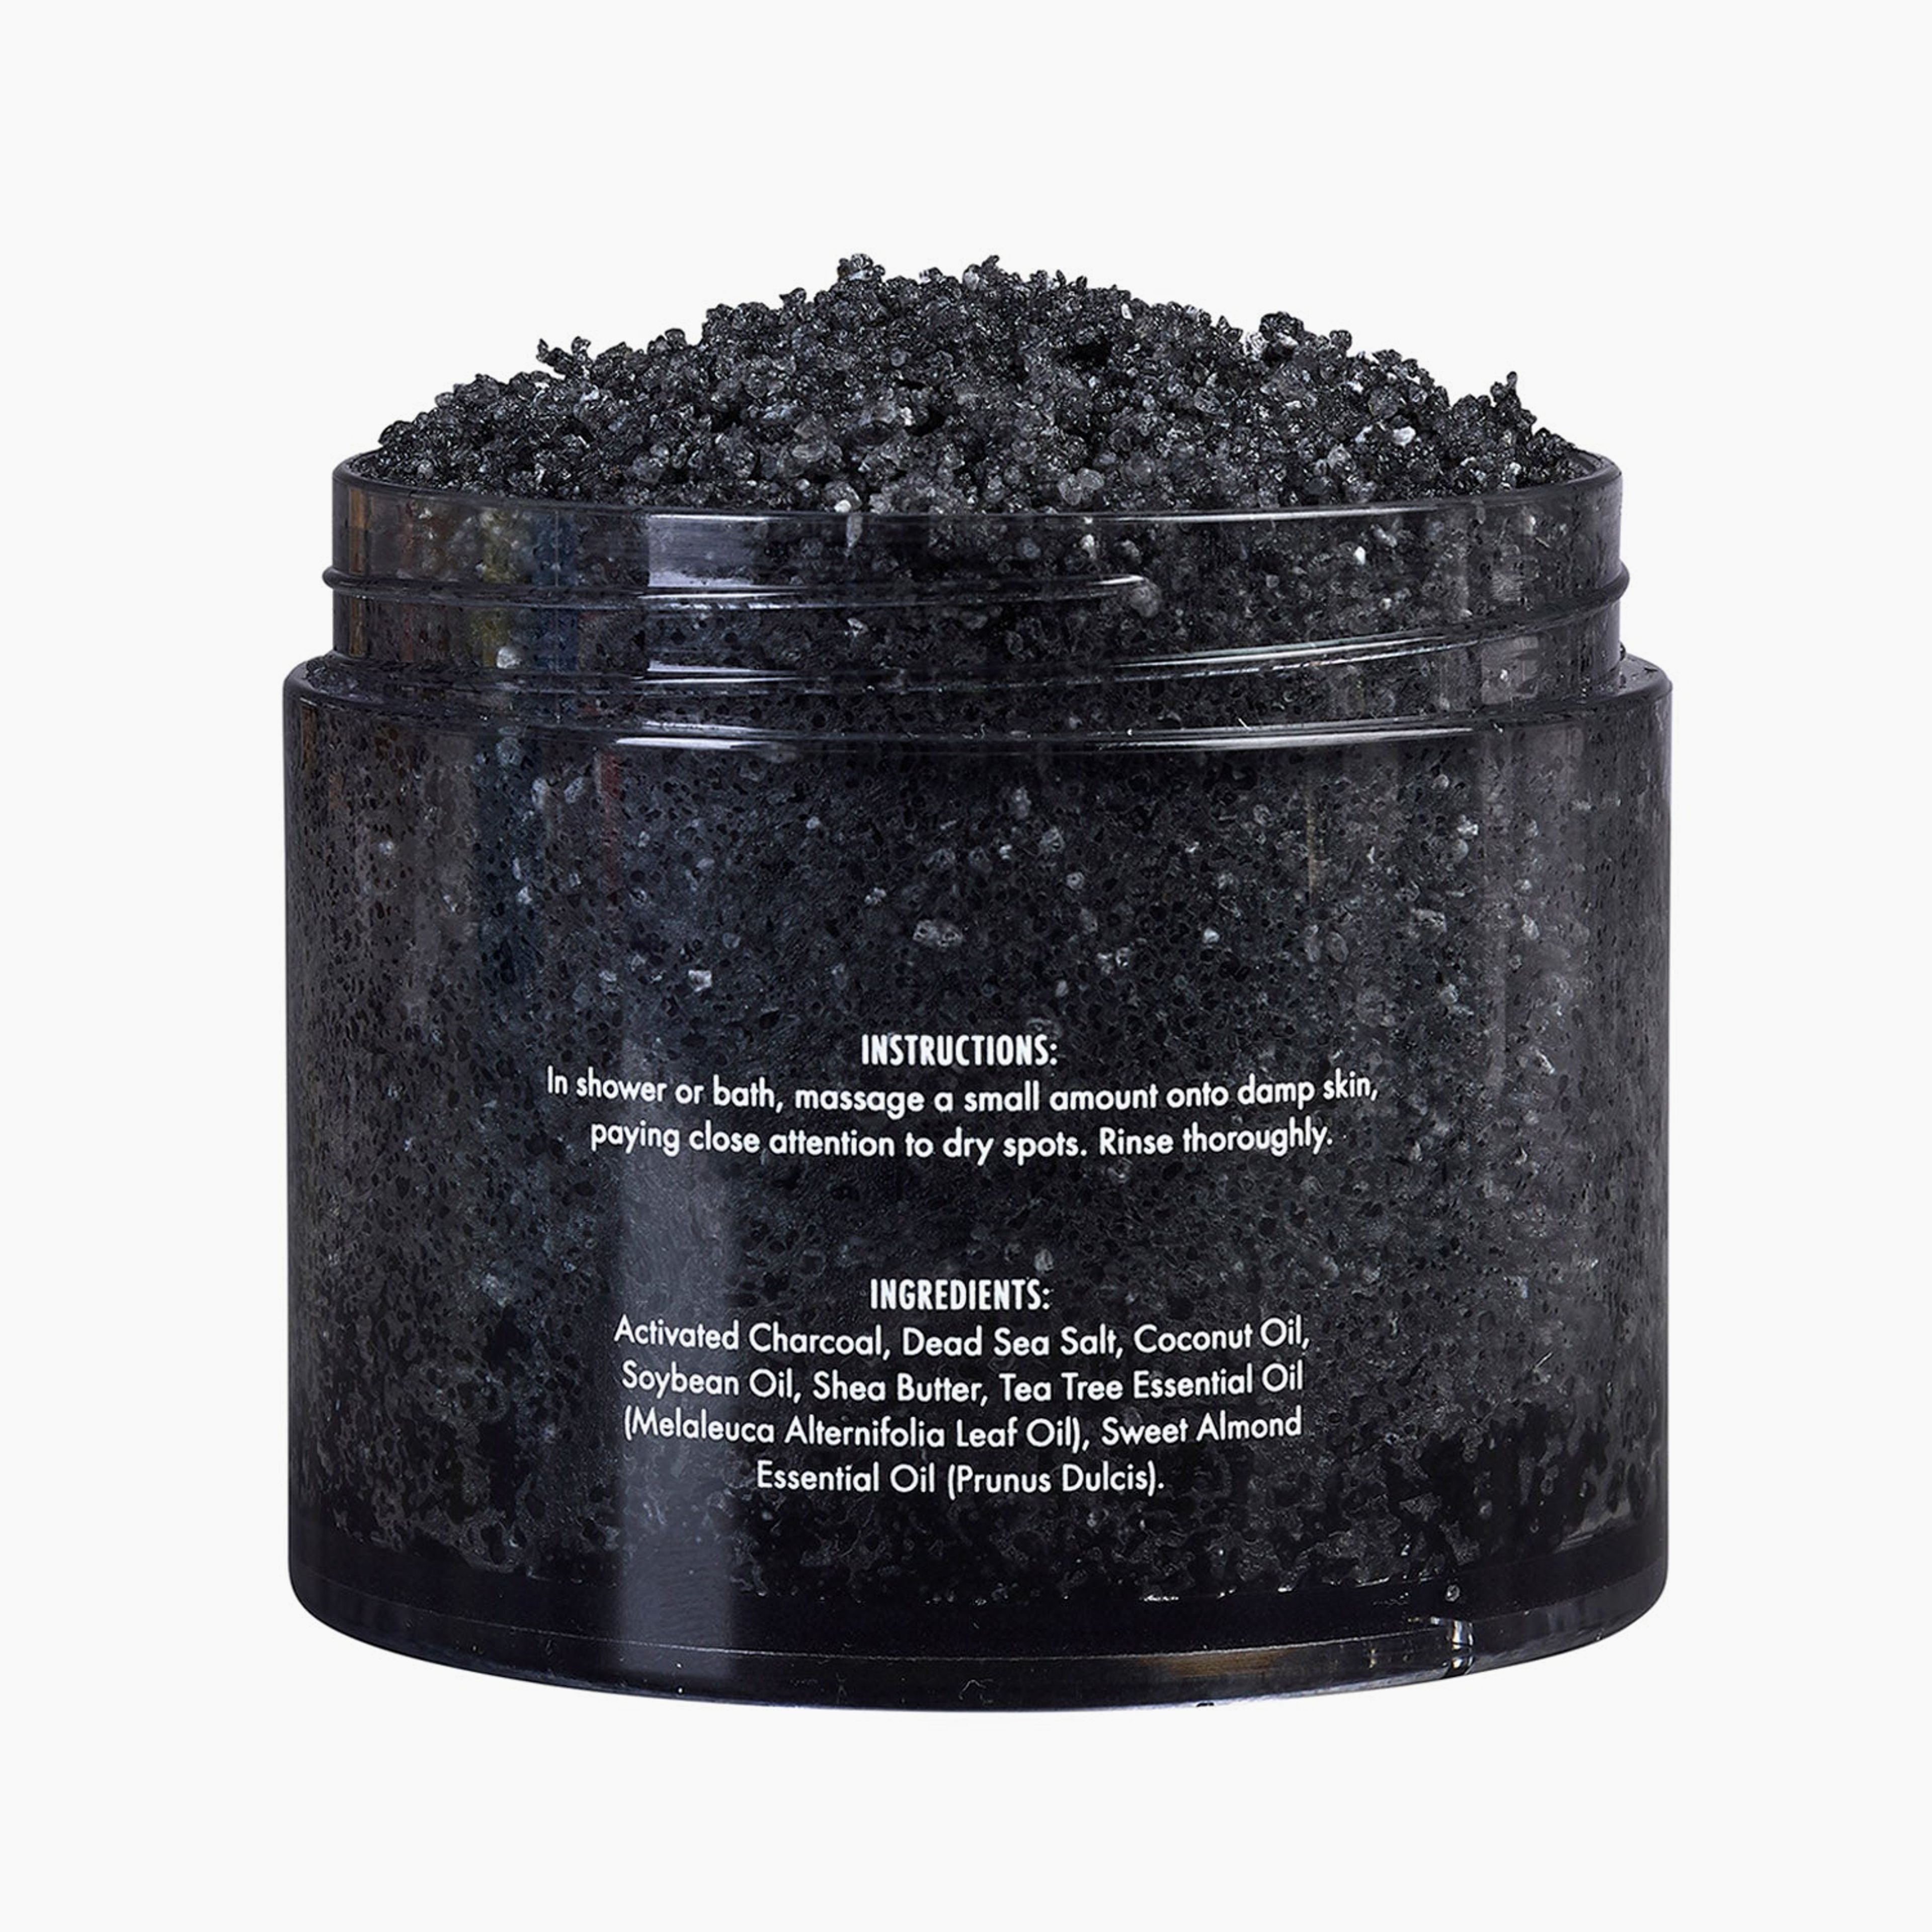 Activated Charcoal Tea Tree Body Scrub